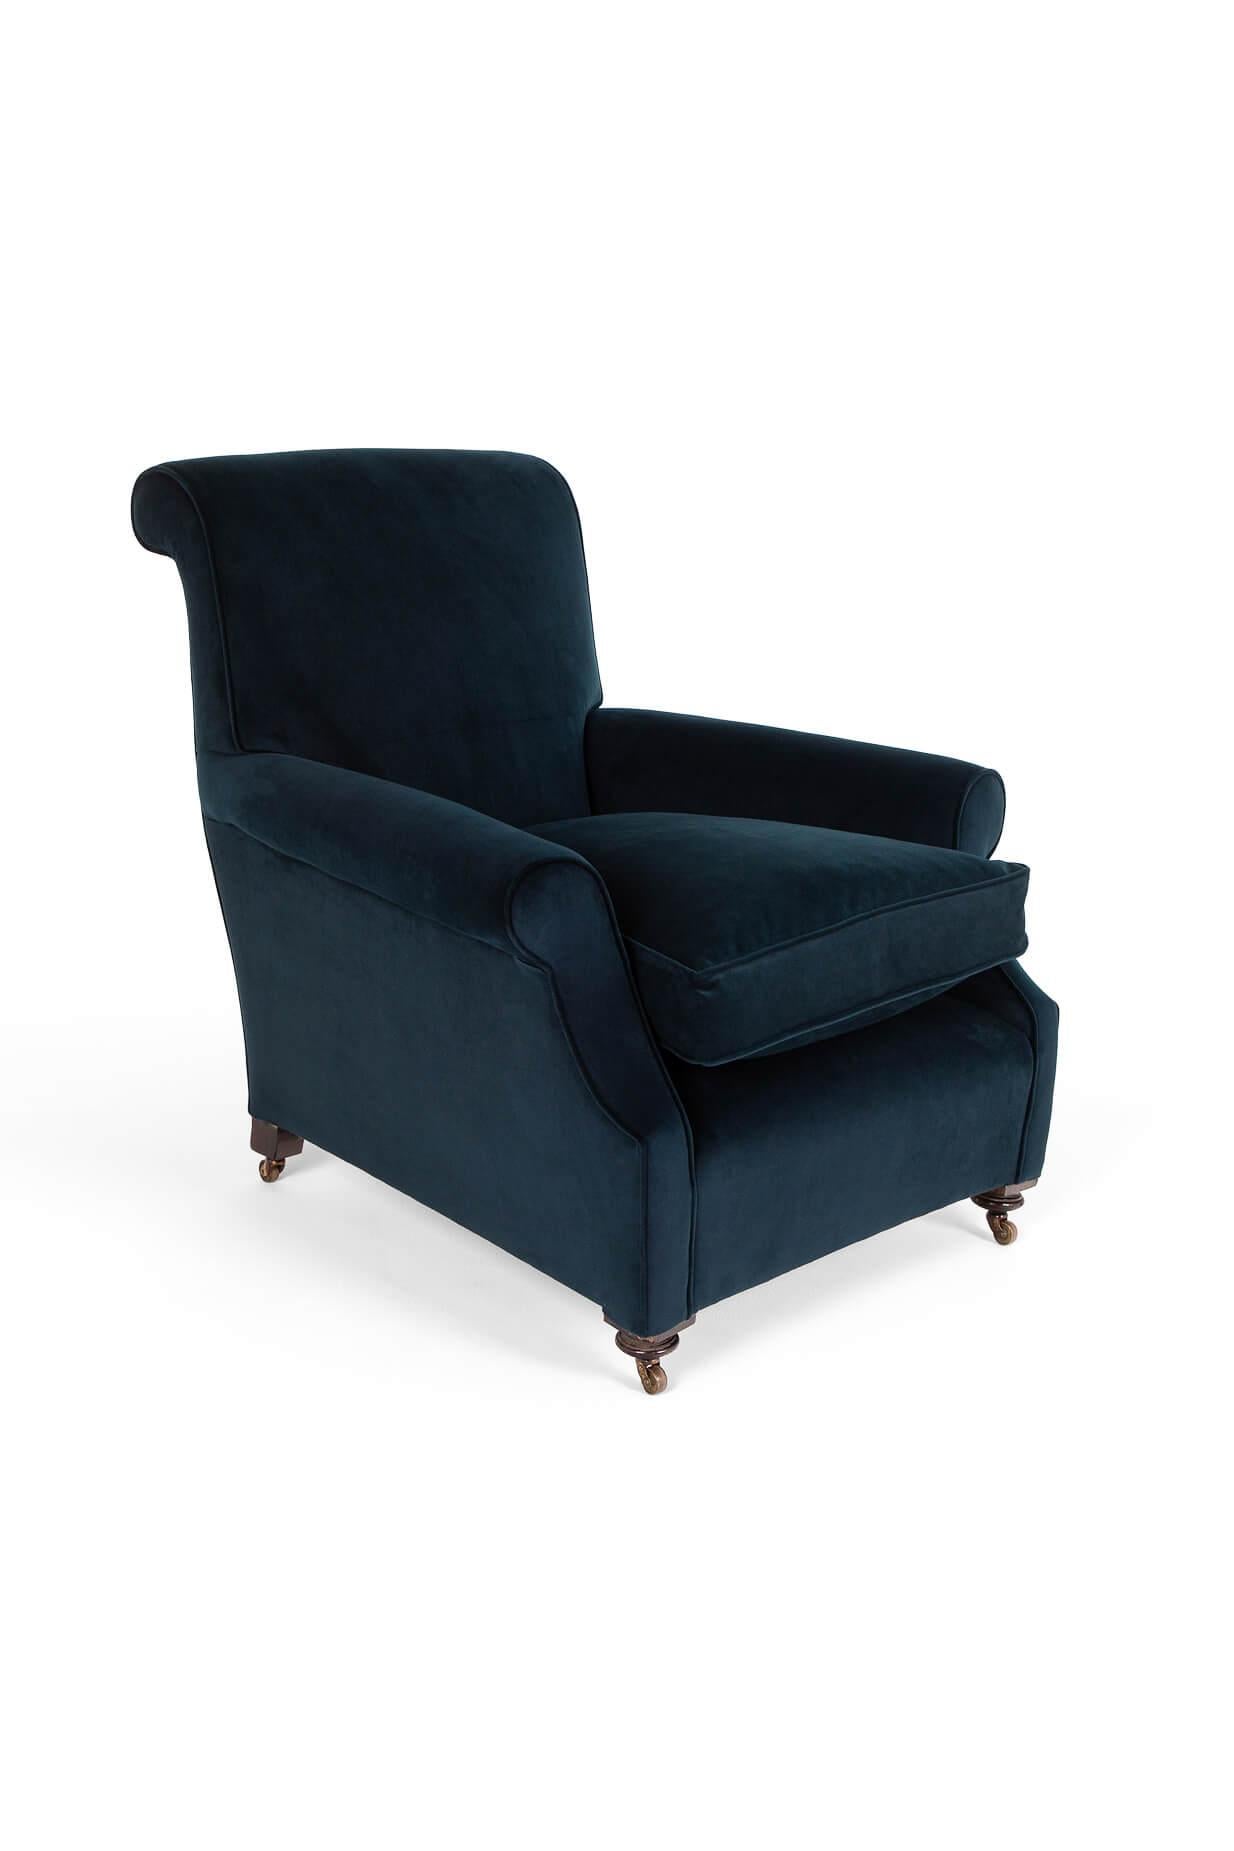 A wonderful navy blue  armchair of generous proportions.

Featuring a high back, scrolling arms and an inviting wide and deep seat.

Mahogany frame with turned front legs raised on original brass castors.

Fully reupholstered with hessian and calico